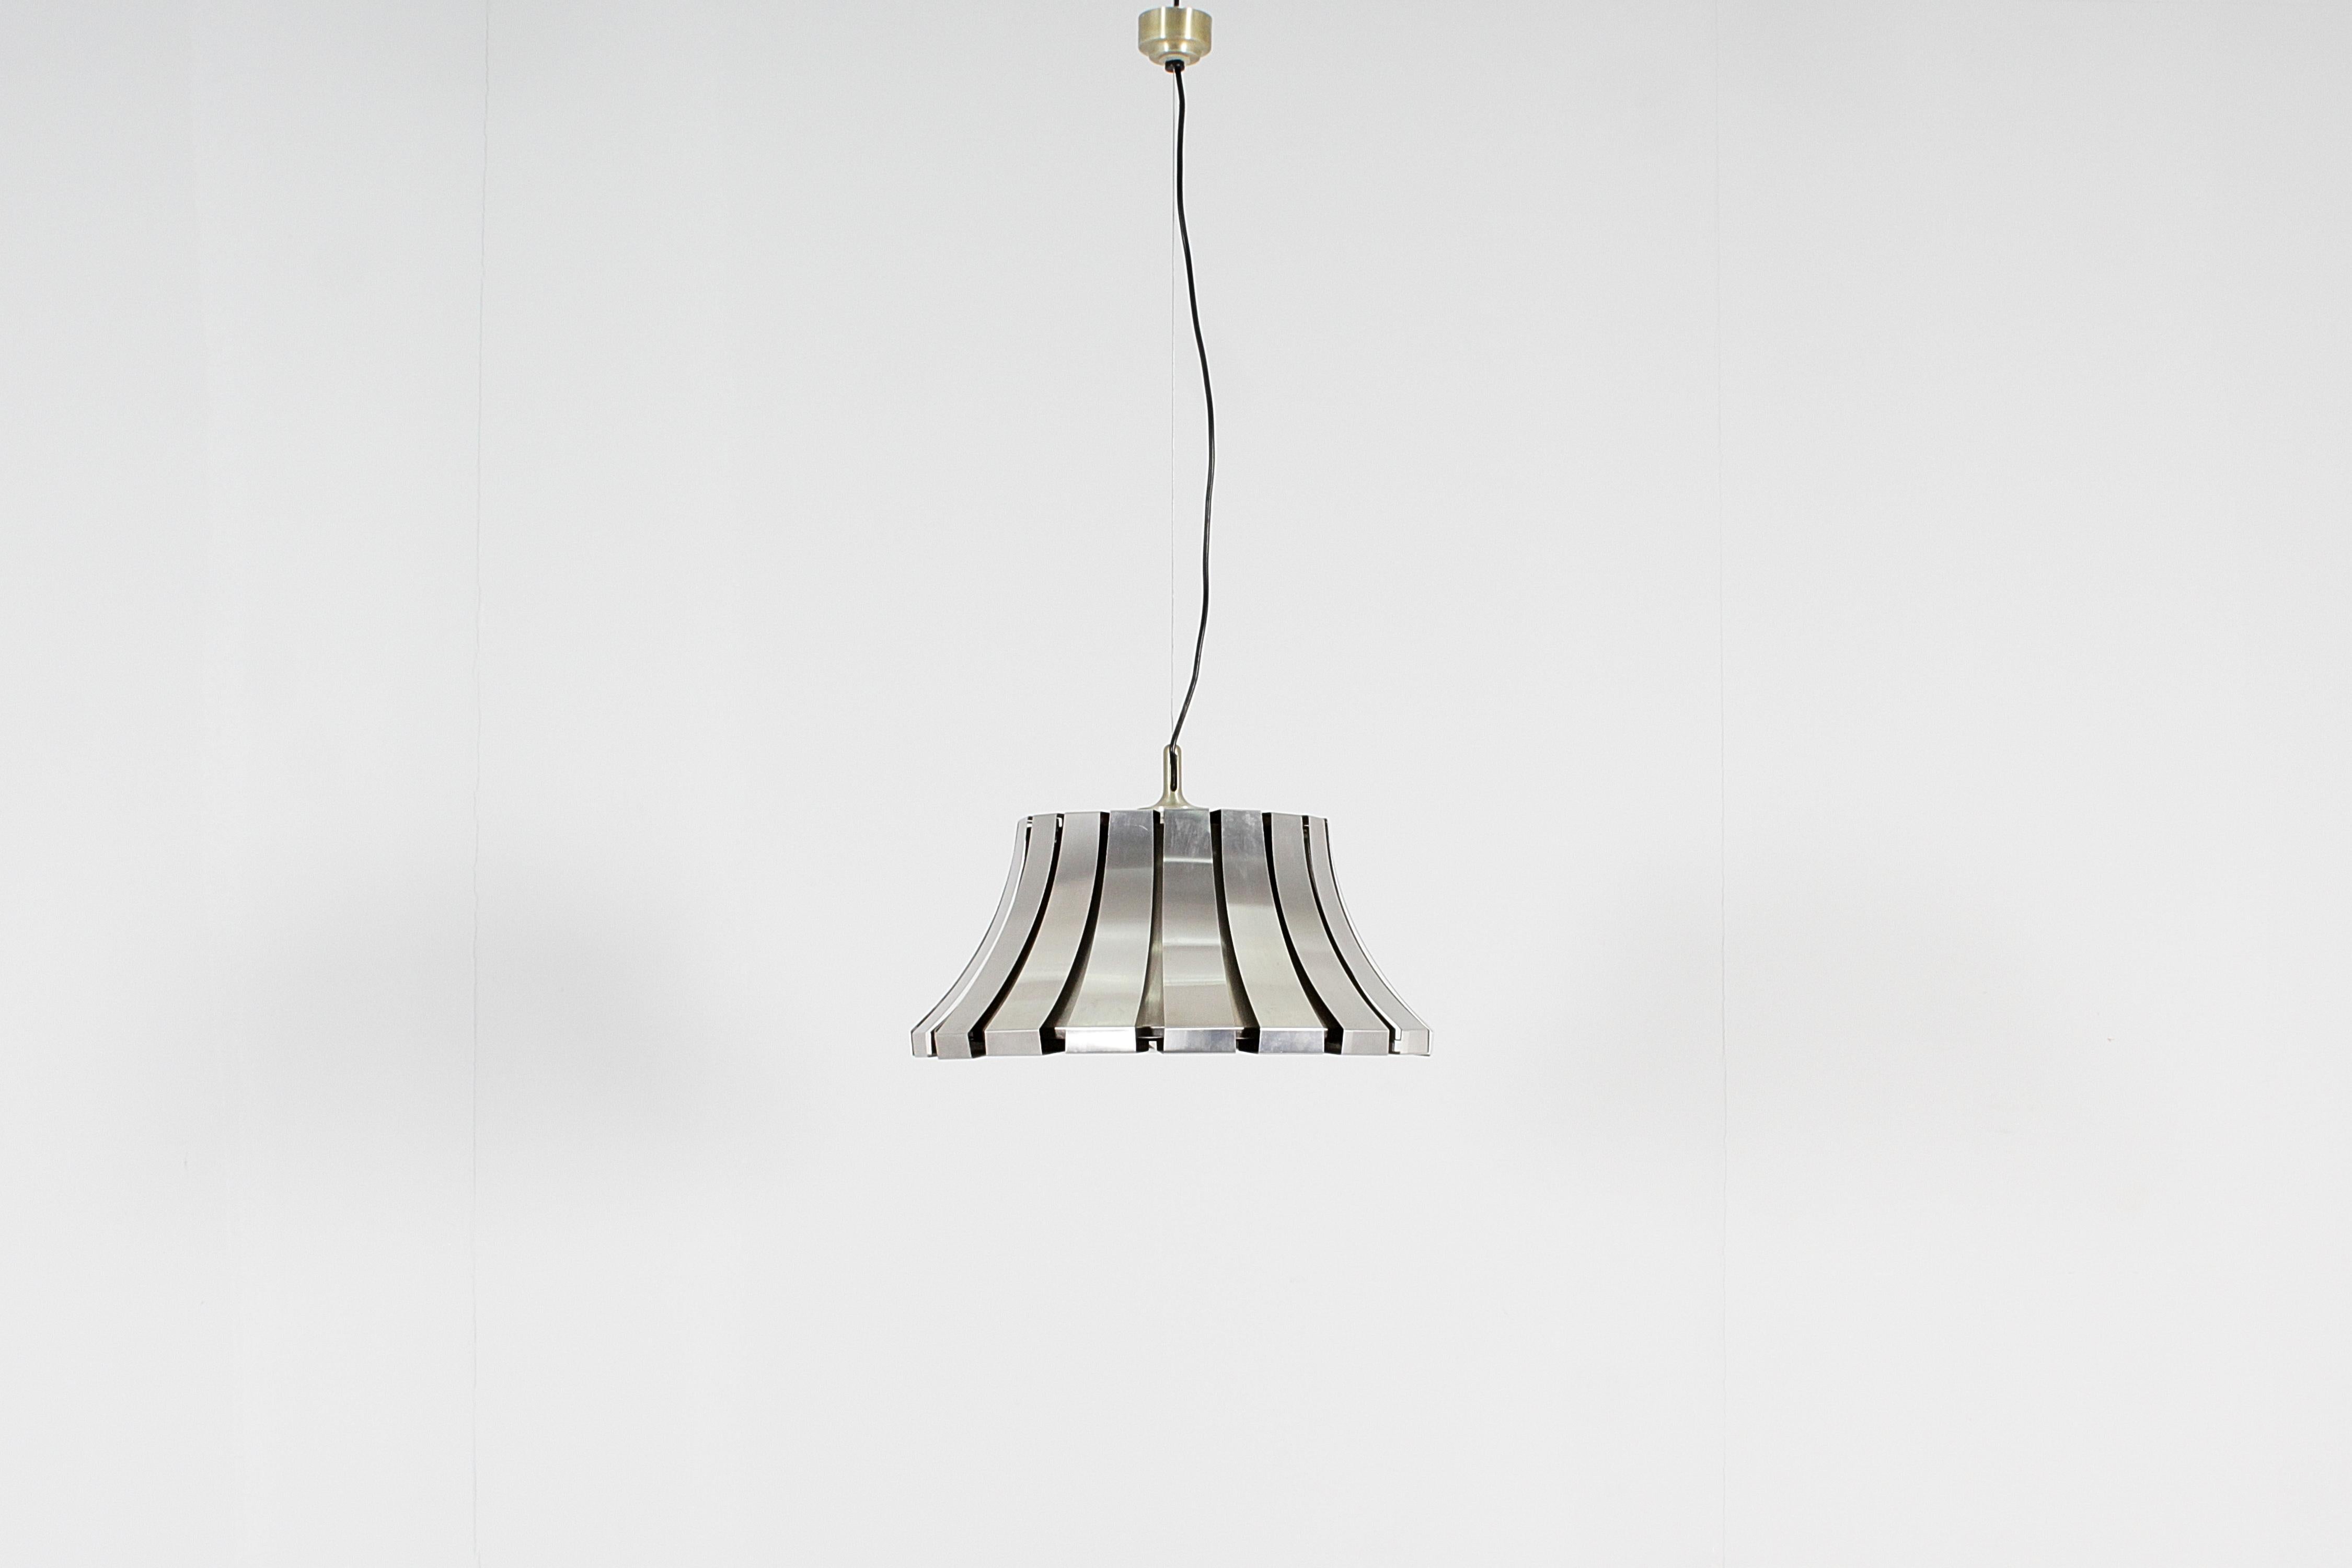 Suspension lamp with printed and shaped satin steel sheet band cap. Italian production by Elio Martinelli for Martinelli Luce, Lucca, 1960s. Maker's label on top.

Bibliography:
G. Gramigna, 1950-1980 repertorio, Arnoldo Mondadori, Milano 1985, p.